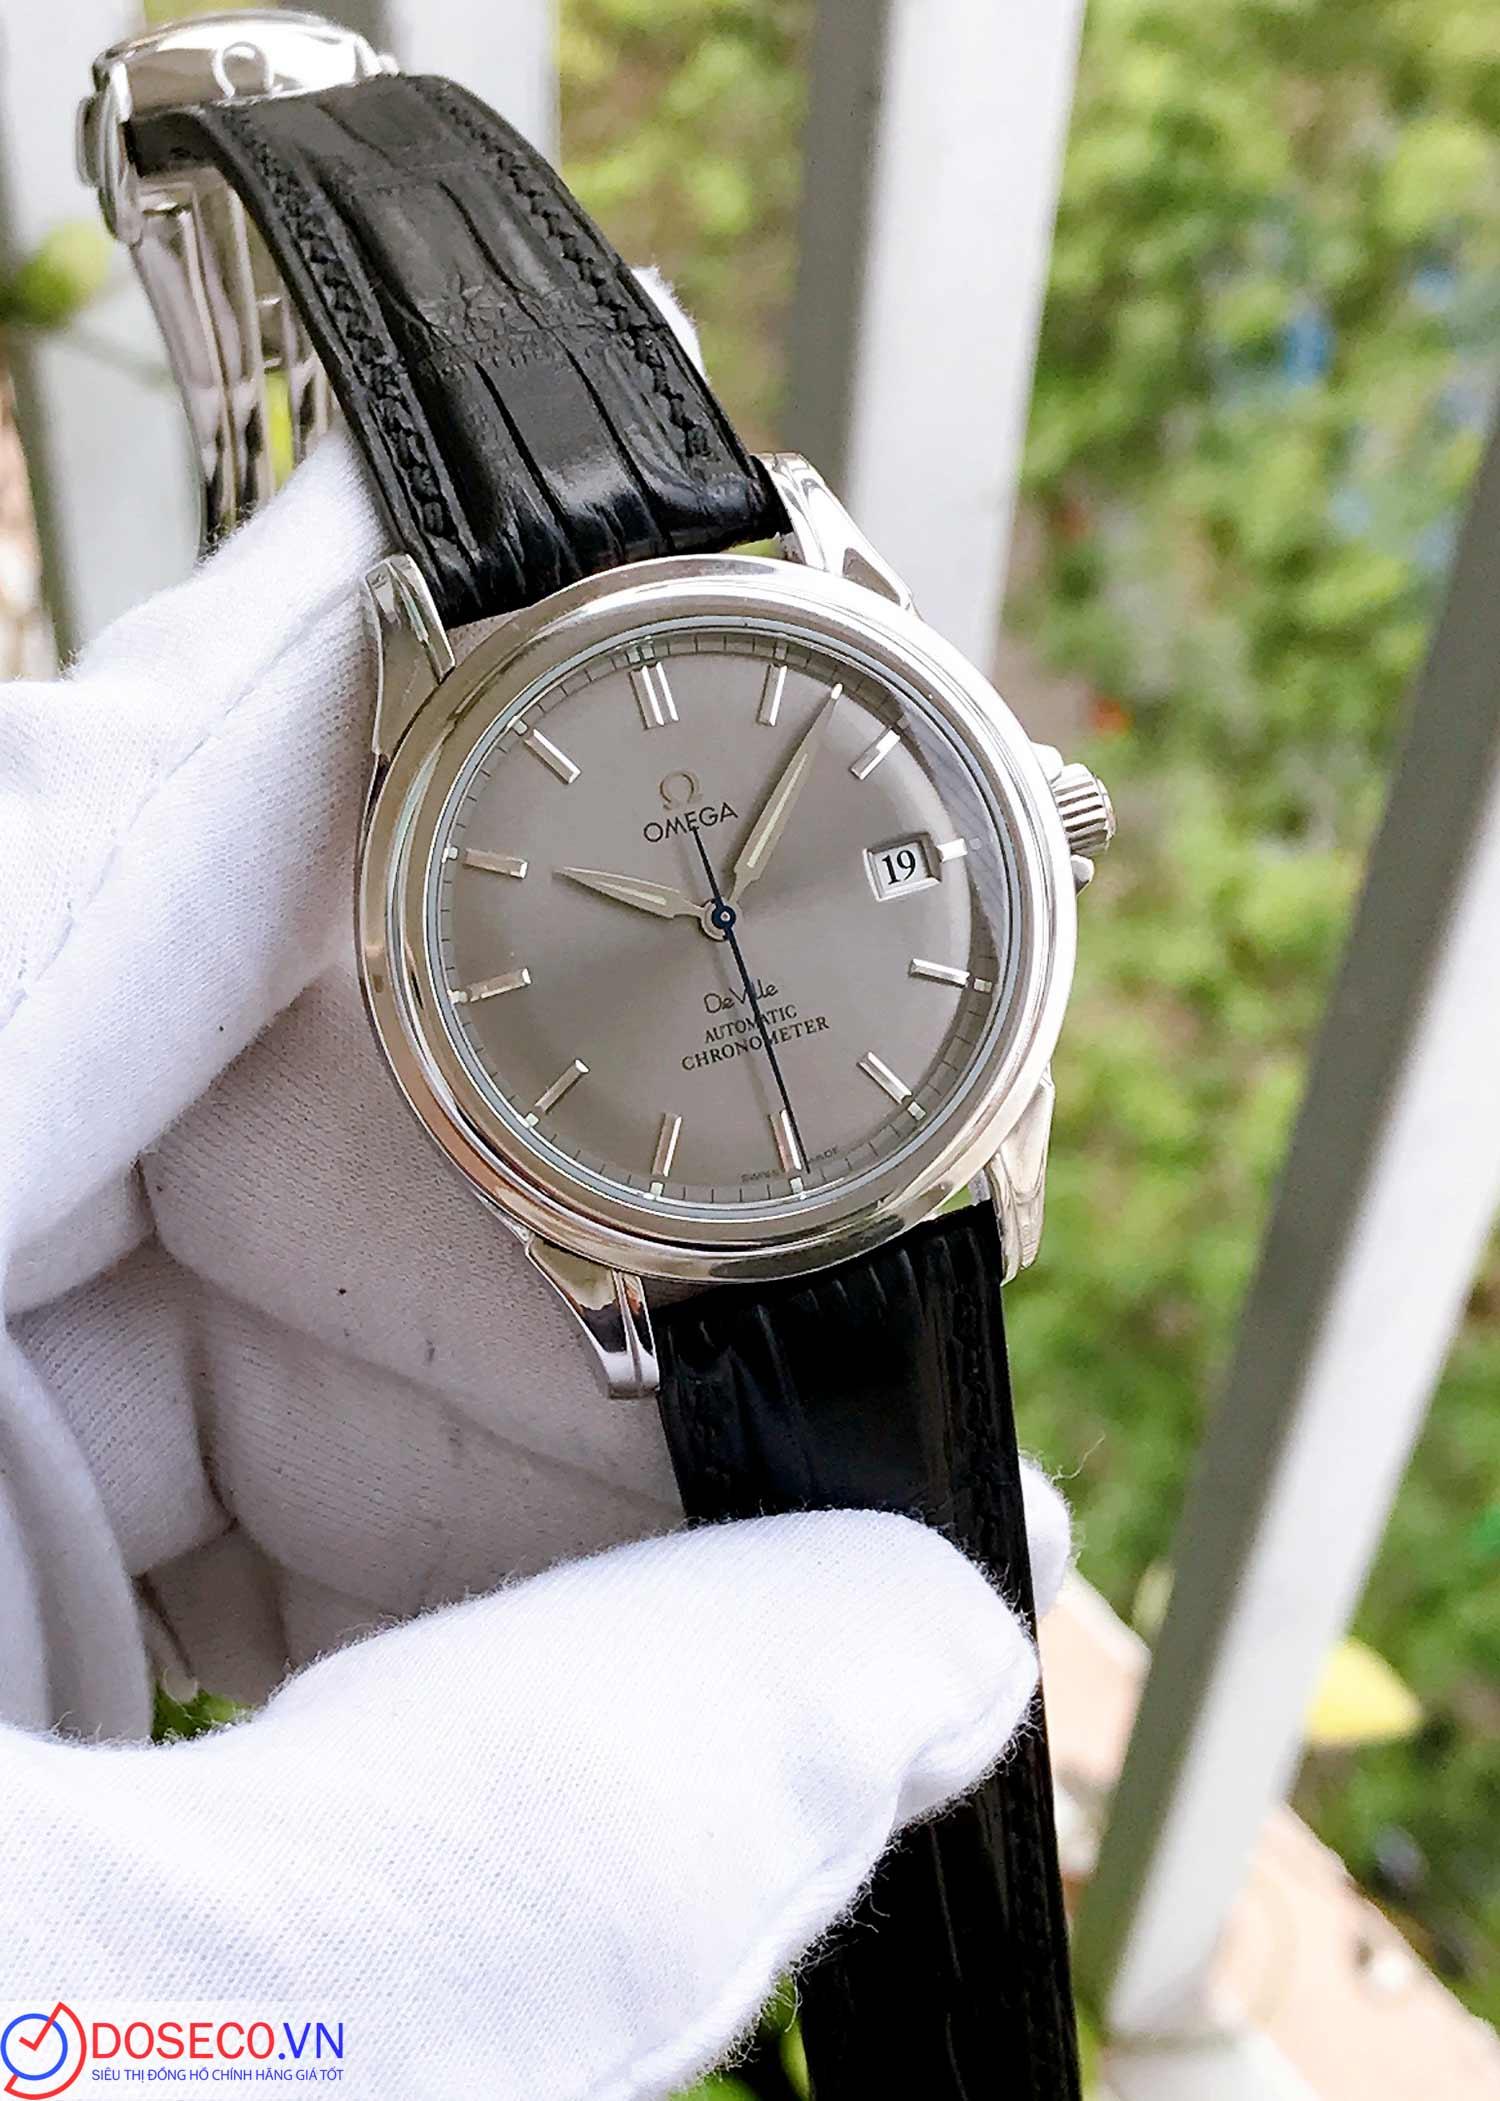 Omega DeVille Co-Axial Chronometer 4831.40.31 (48314031) used thay dây.jpg